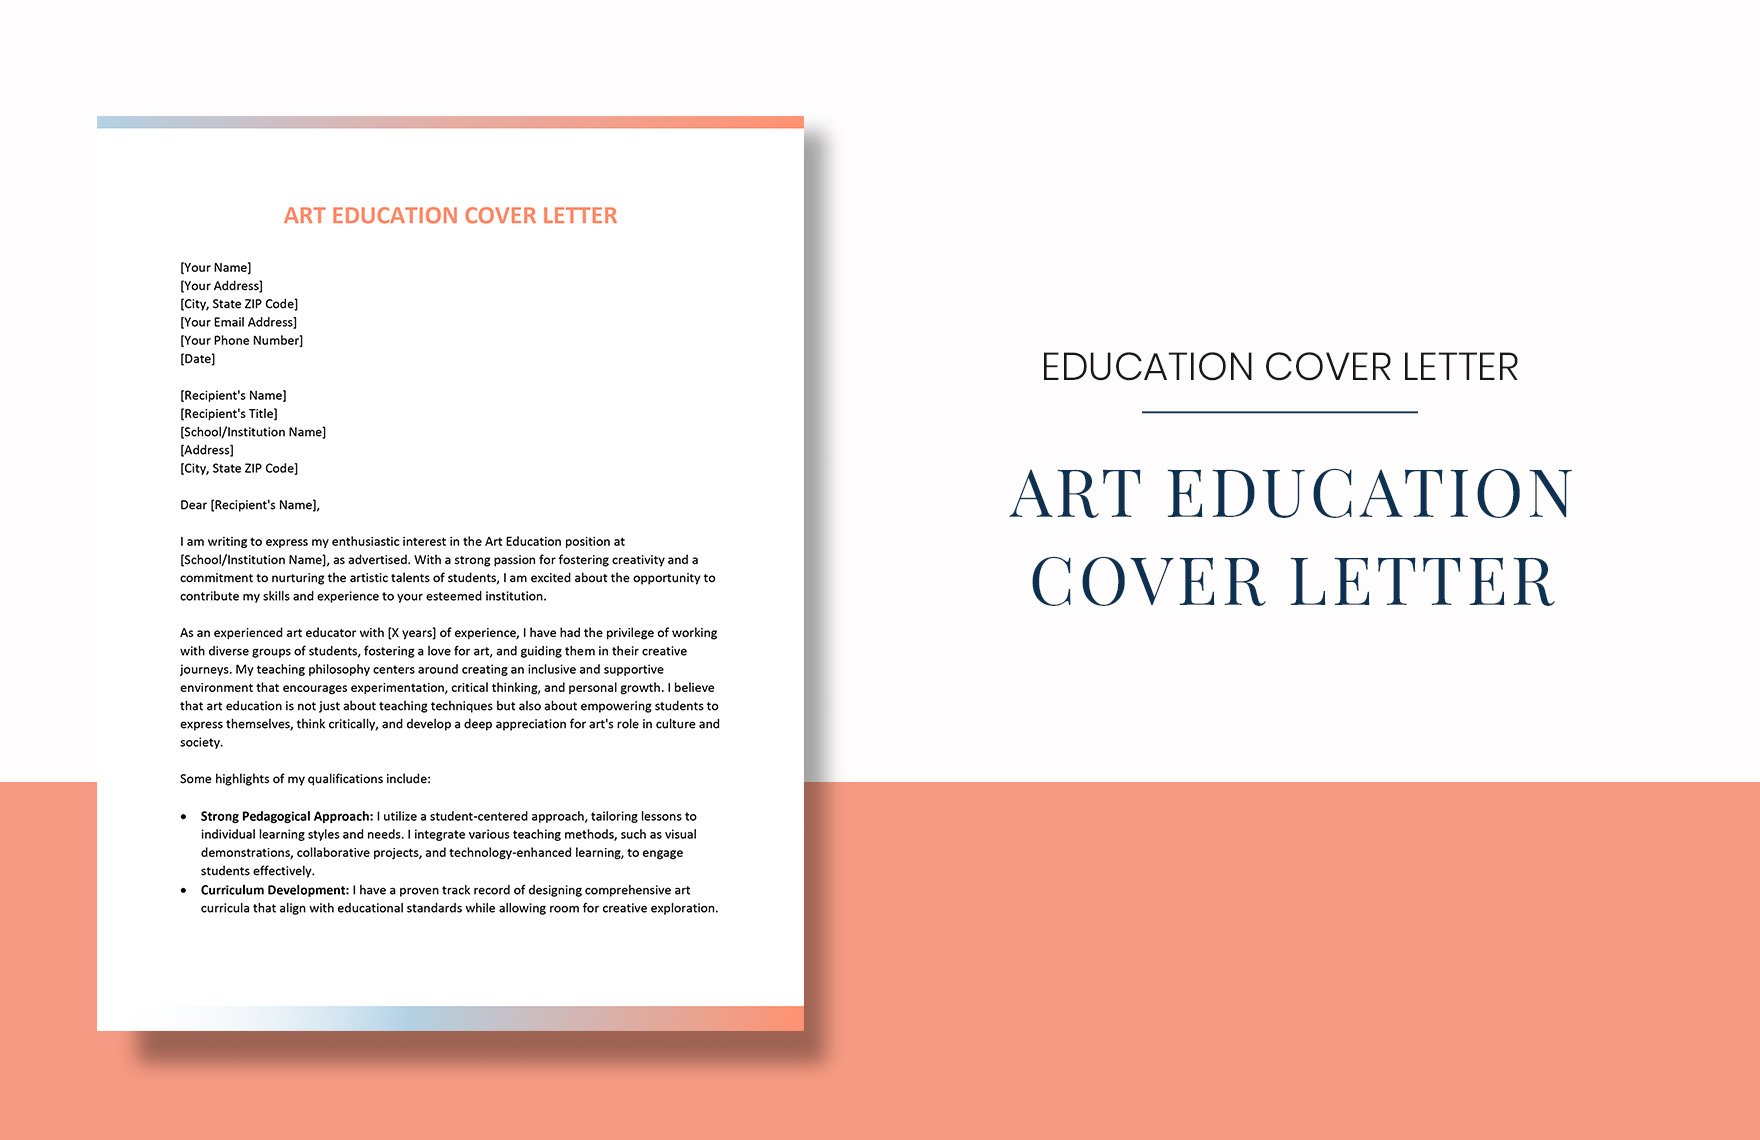 Art Education Cover Letter in Word, Google Docs, Apple Pages